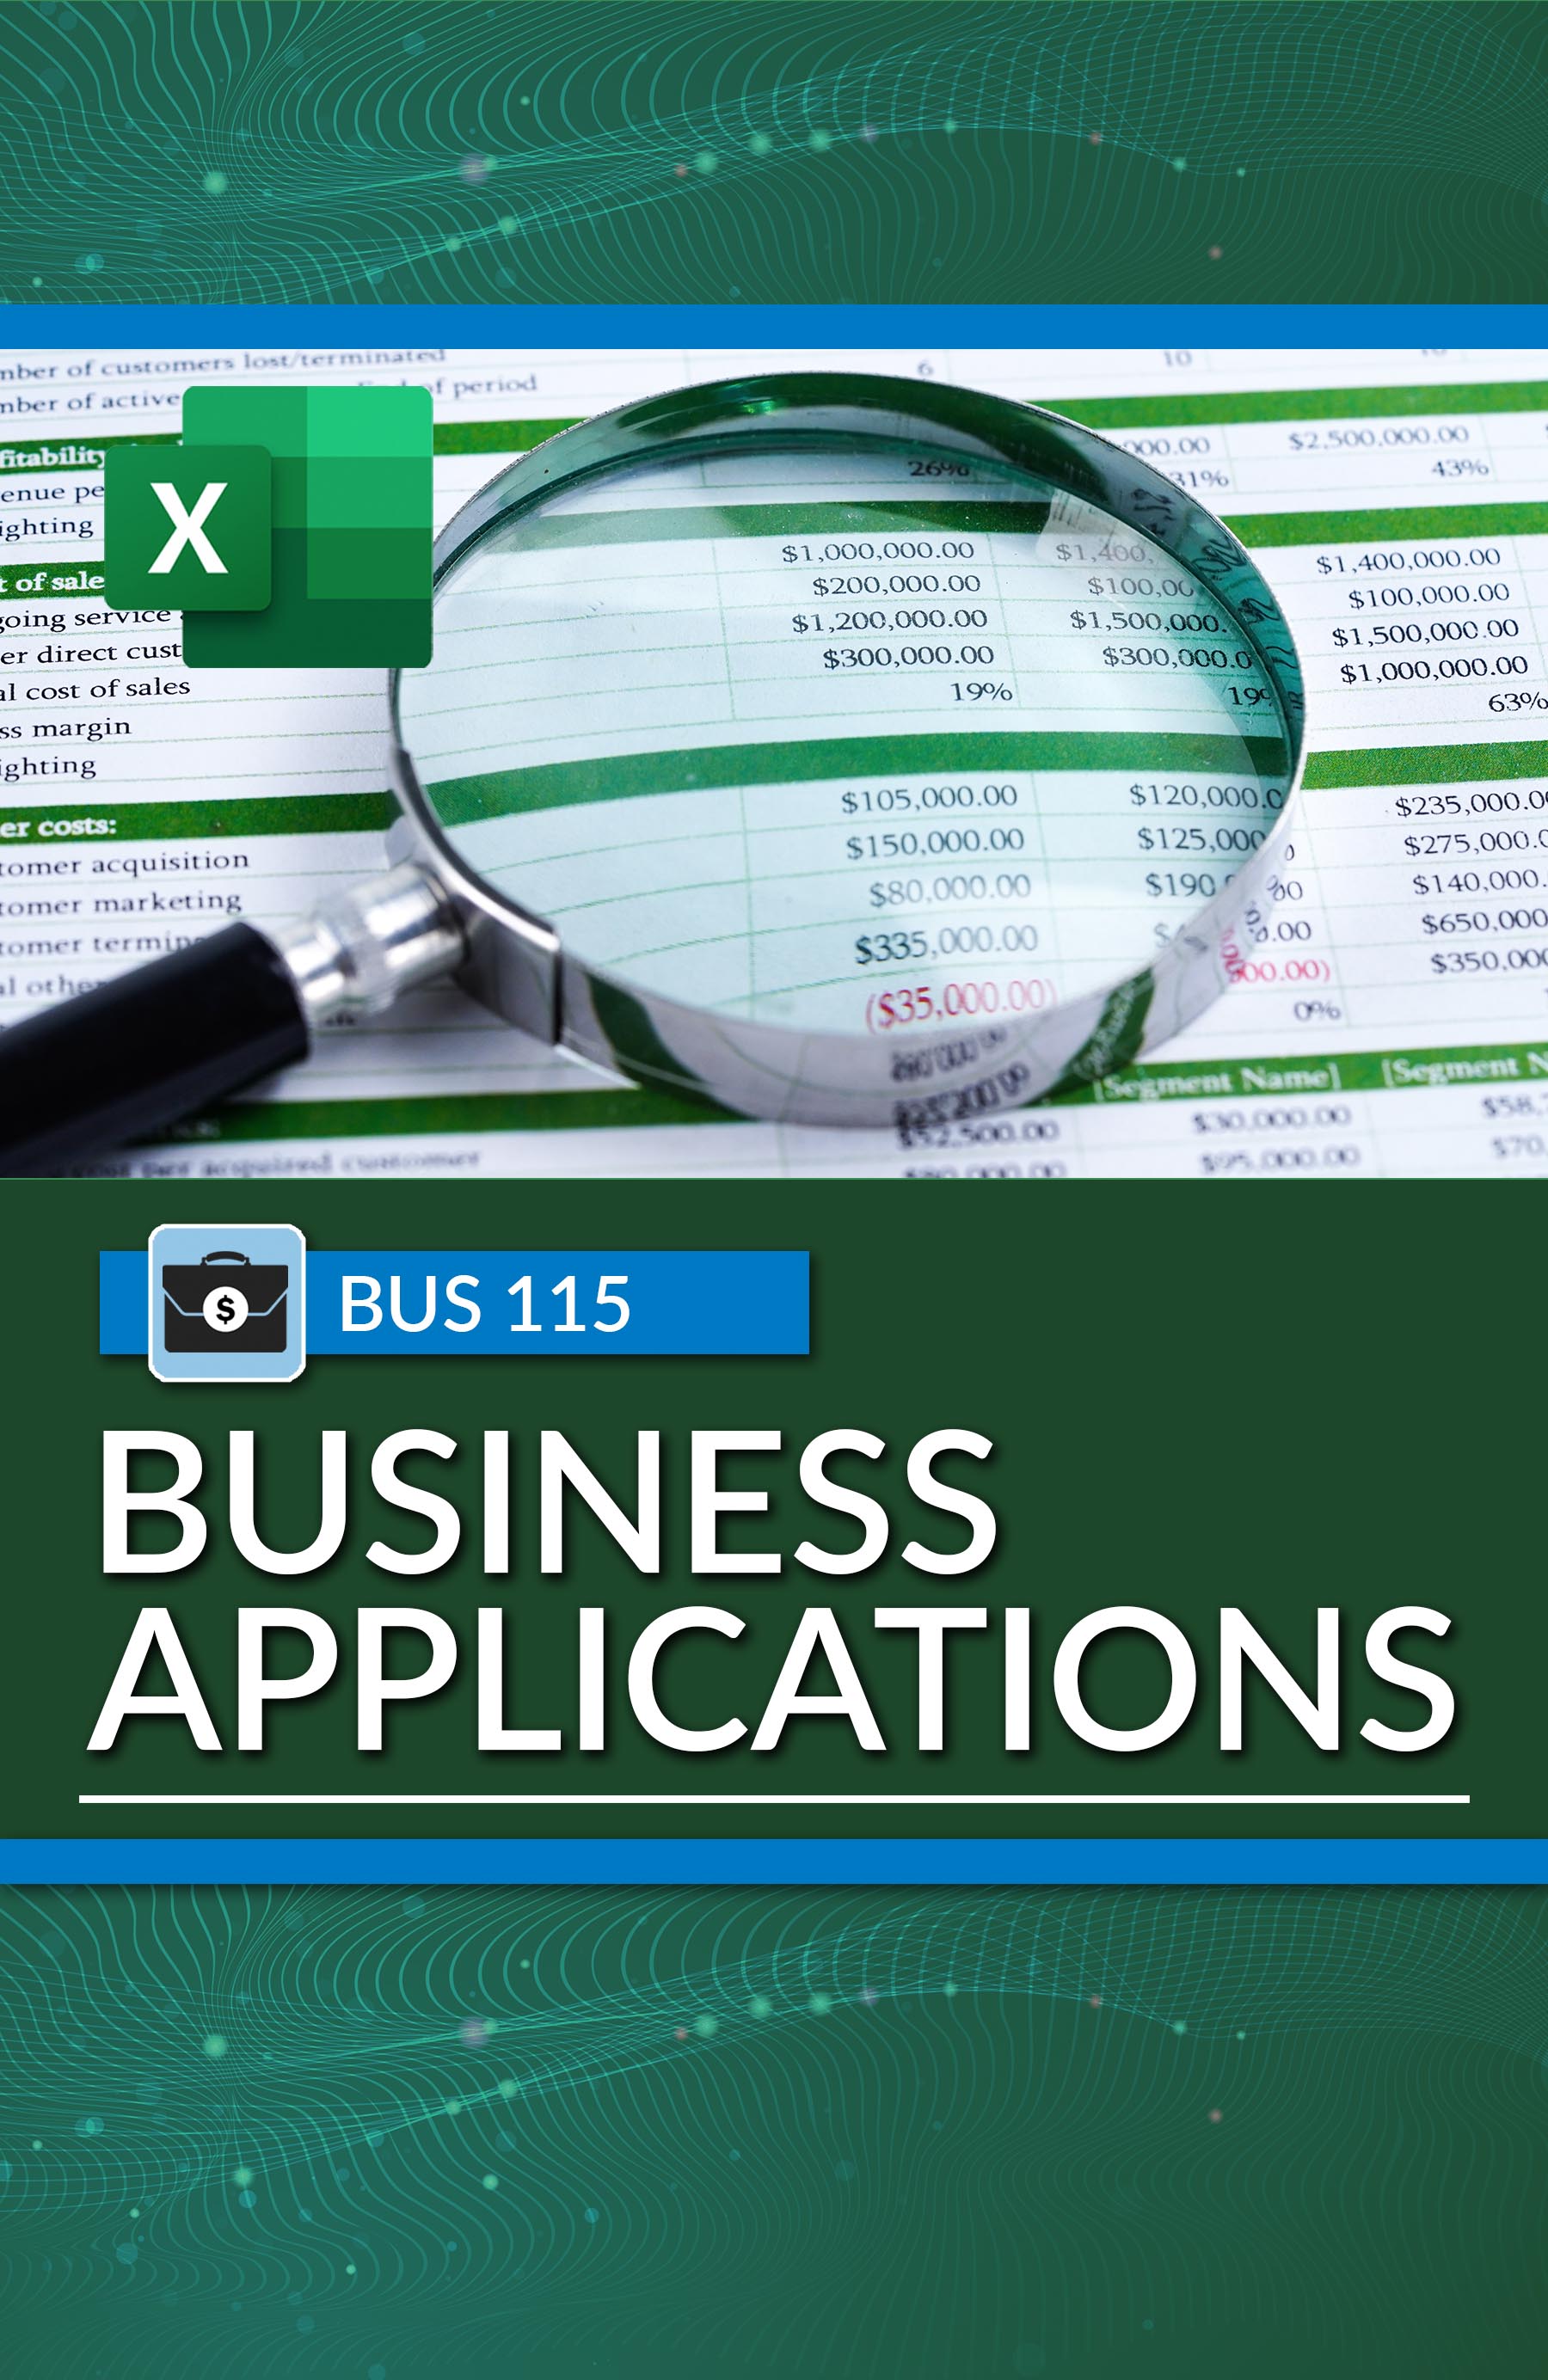 BUS 115 - Business Applications: Excel in Practice